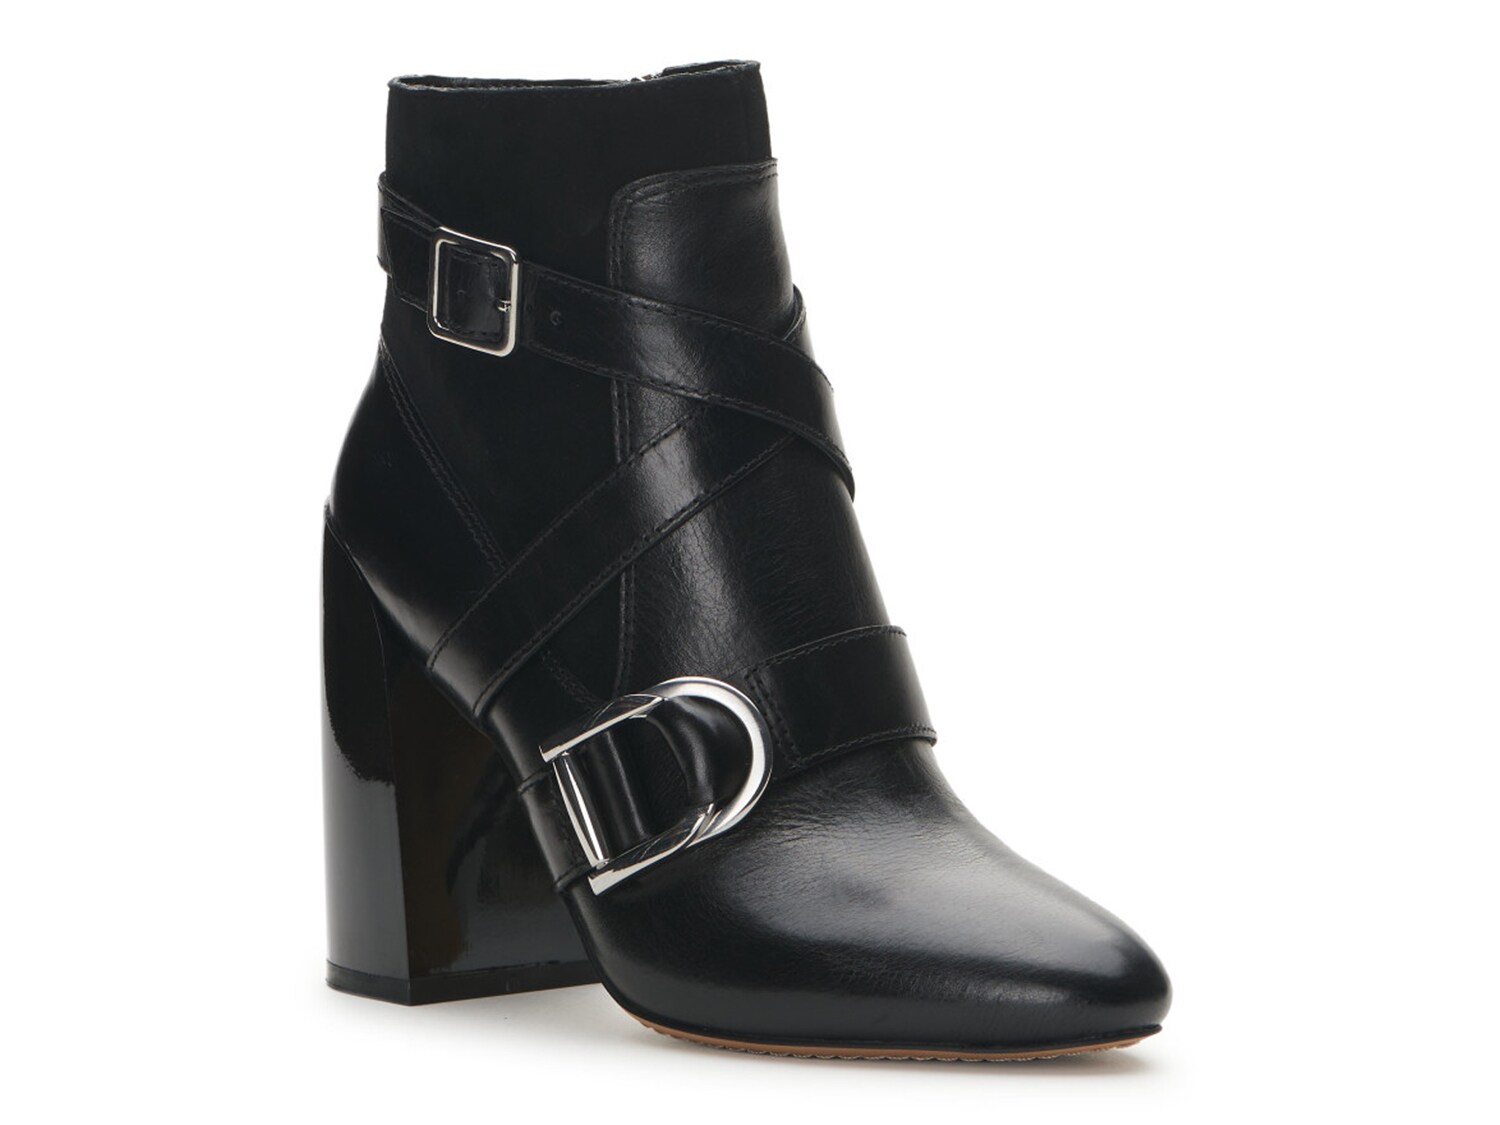 Vince Camuto Erillie Bootie - Free Shipping | DSW